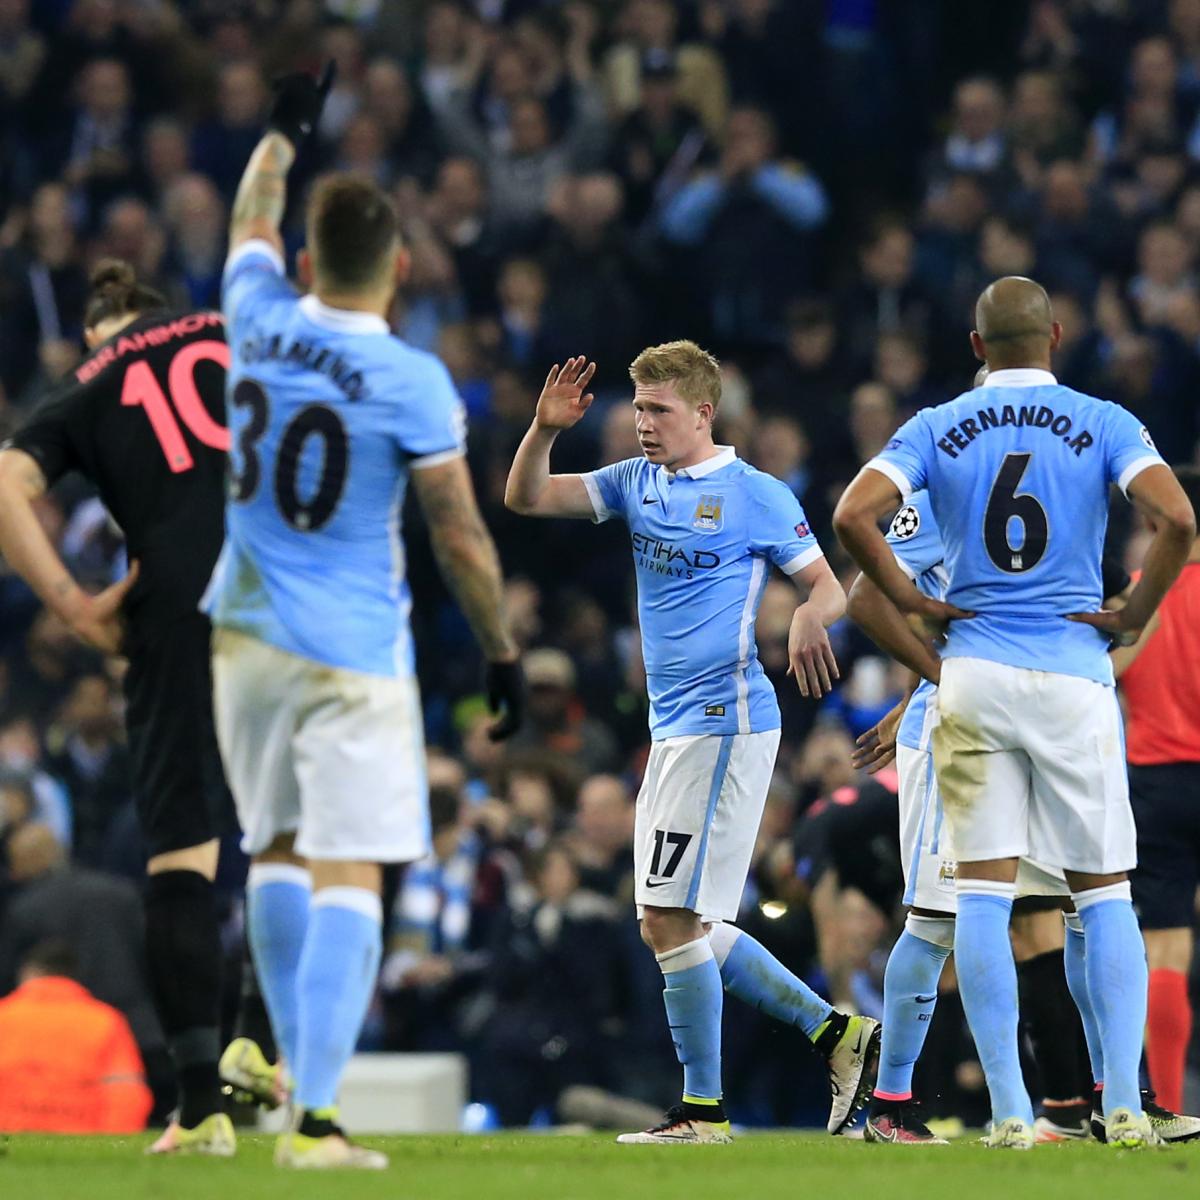 Manchester City Vs Psg Live Score Highlights From Champions League Bleacher Report Latest News Videos And Highlights